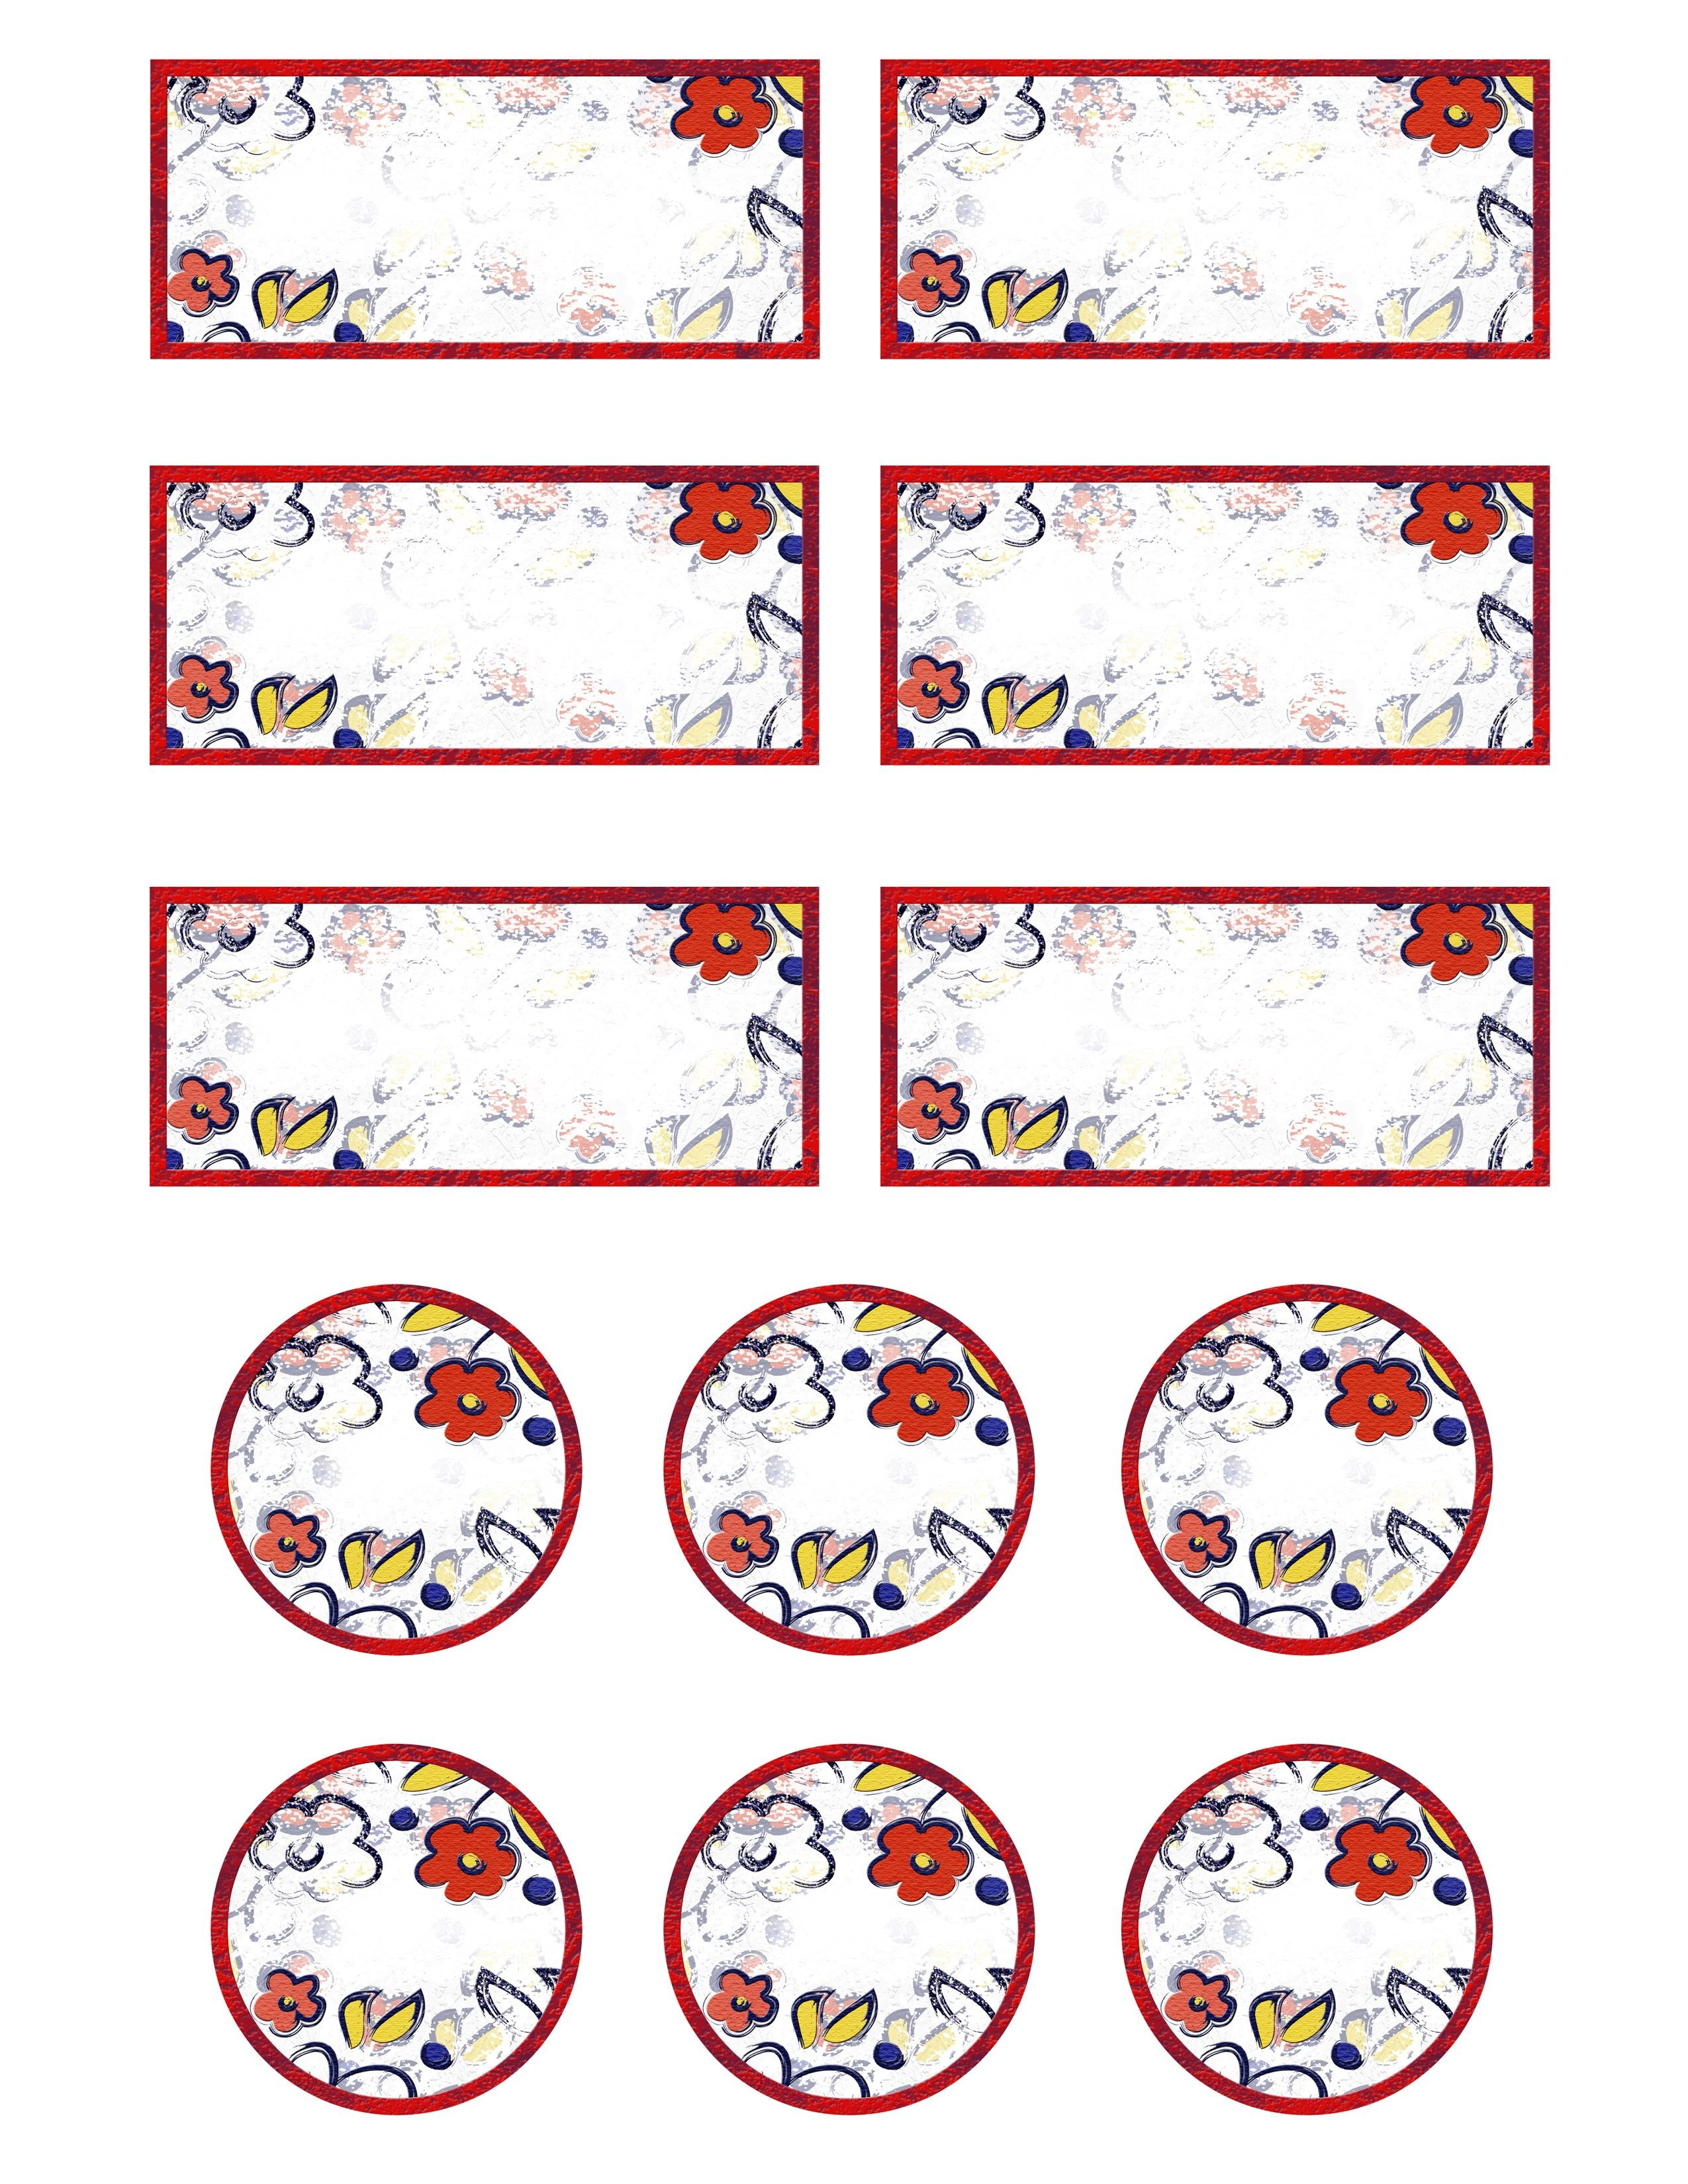 Free Printable Jar Labels For Home Canning  Jams And Jellies  Jam for Chutney Label Templates